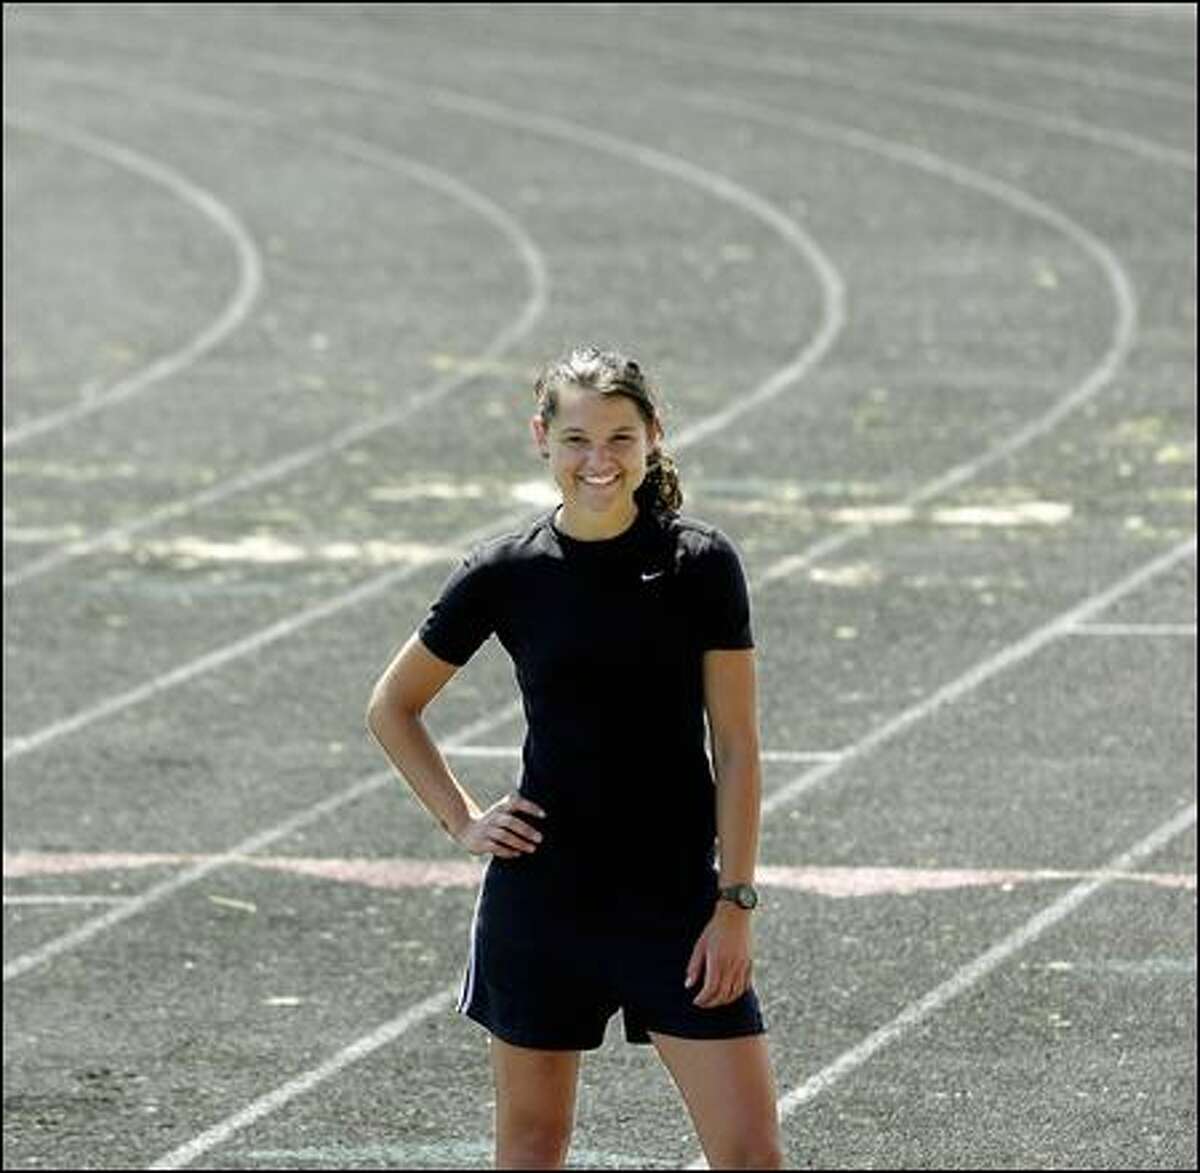 Haley Nemra, a 2008 graduate of Marysville-Pilchuck High, will represent the Marshall Islands in the 800 meters at Beijing.